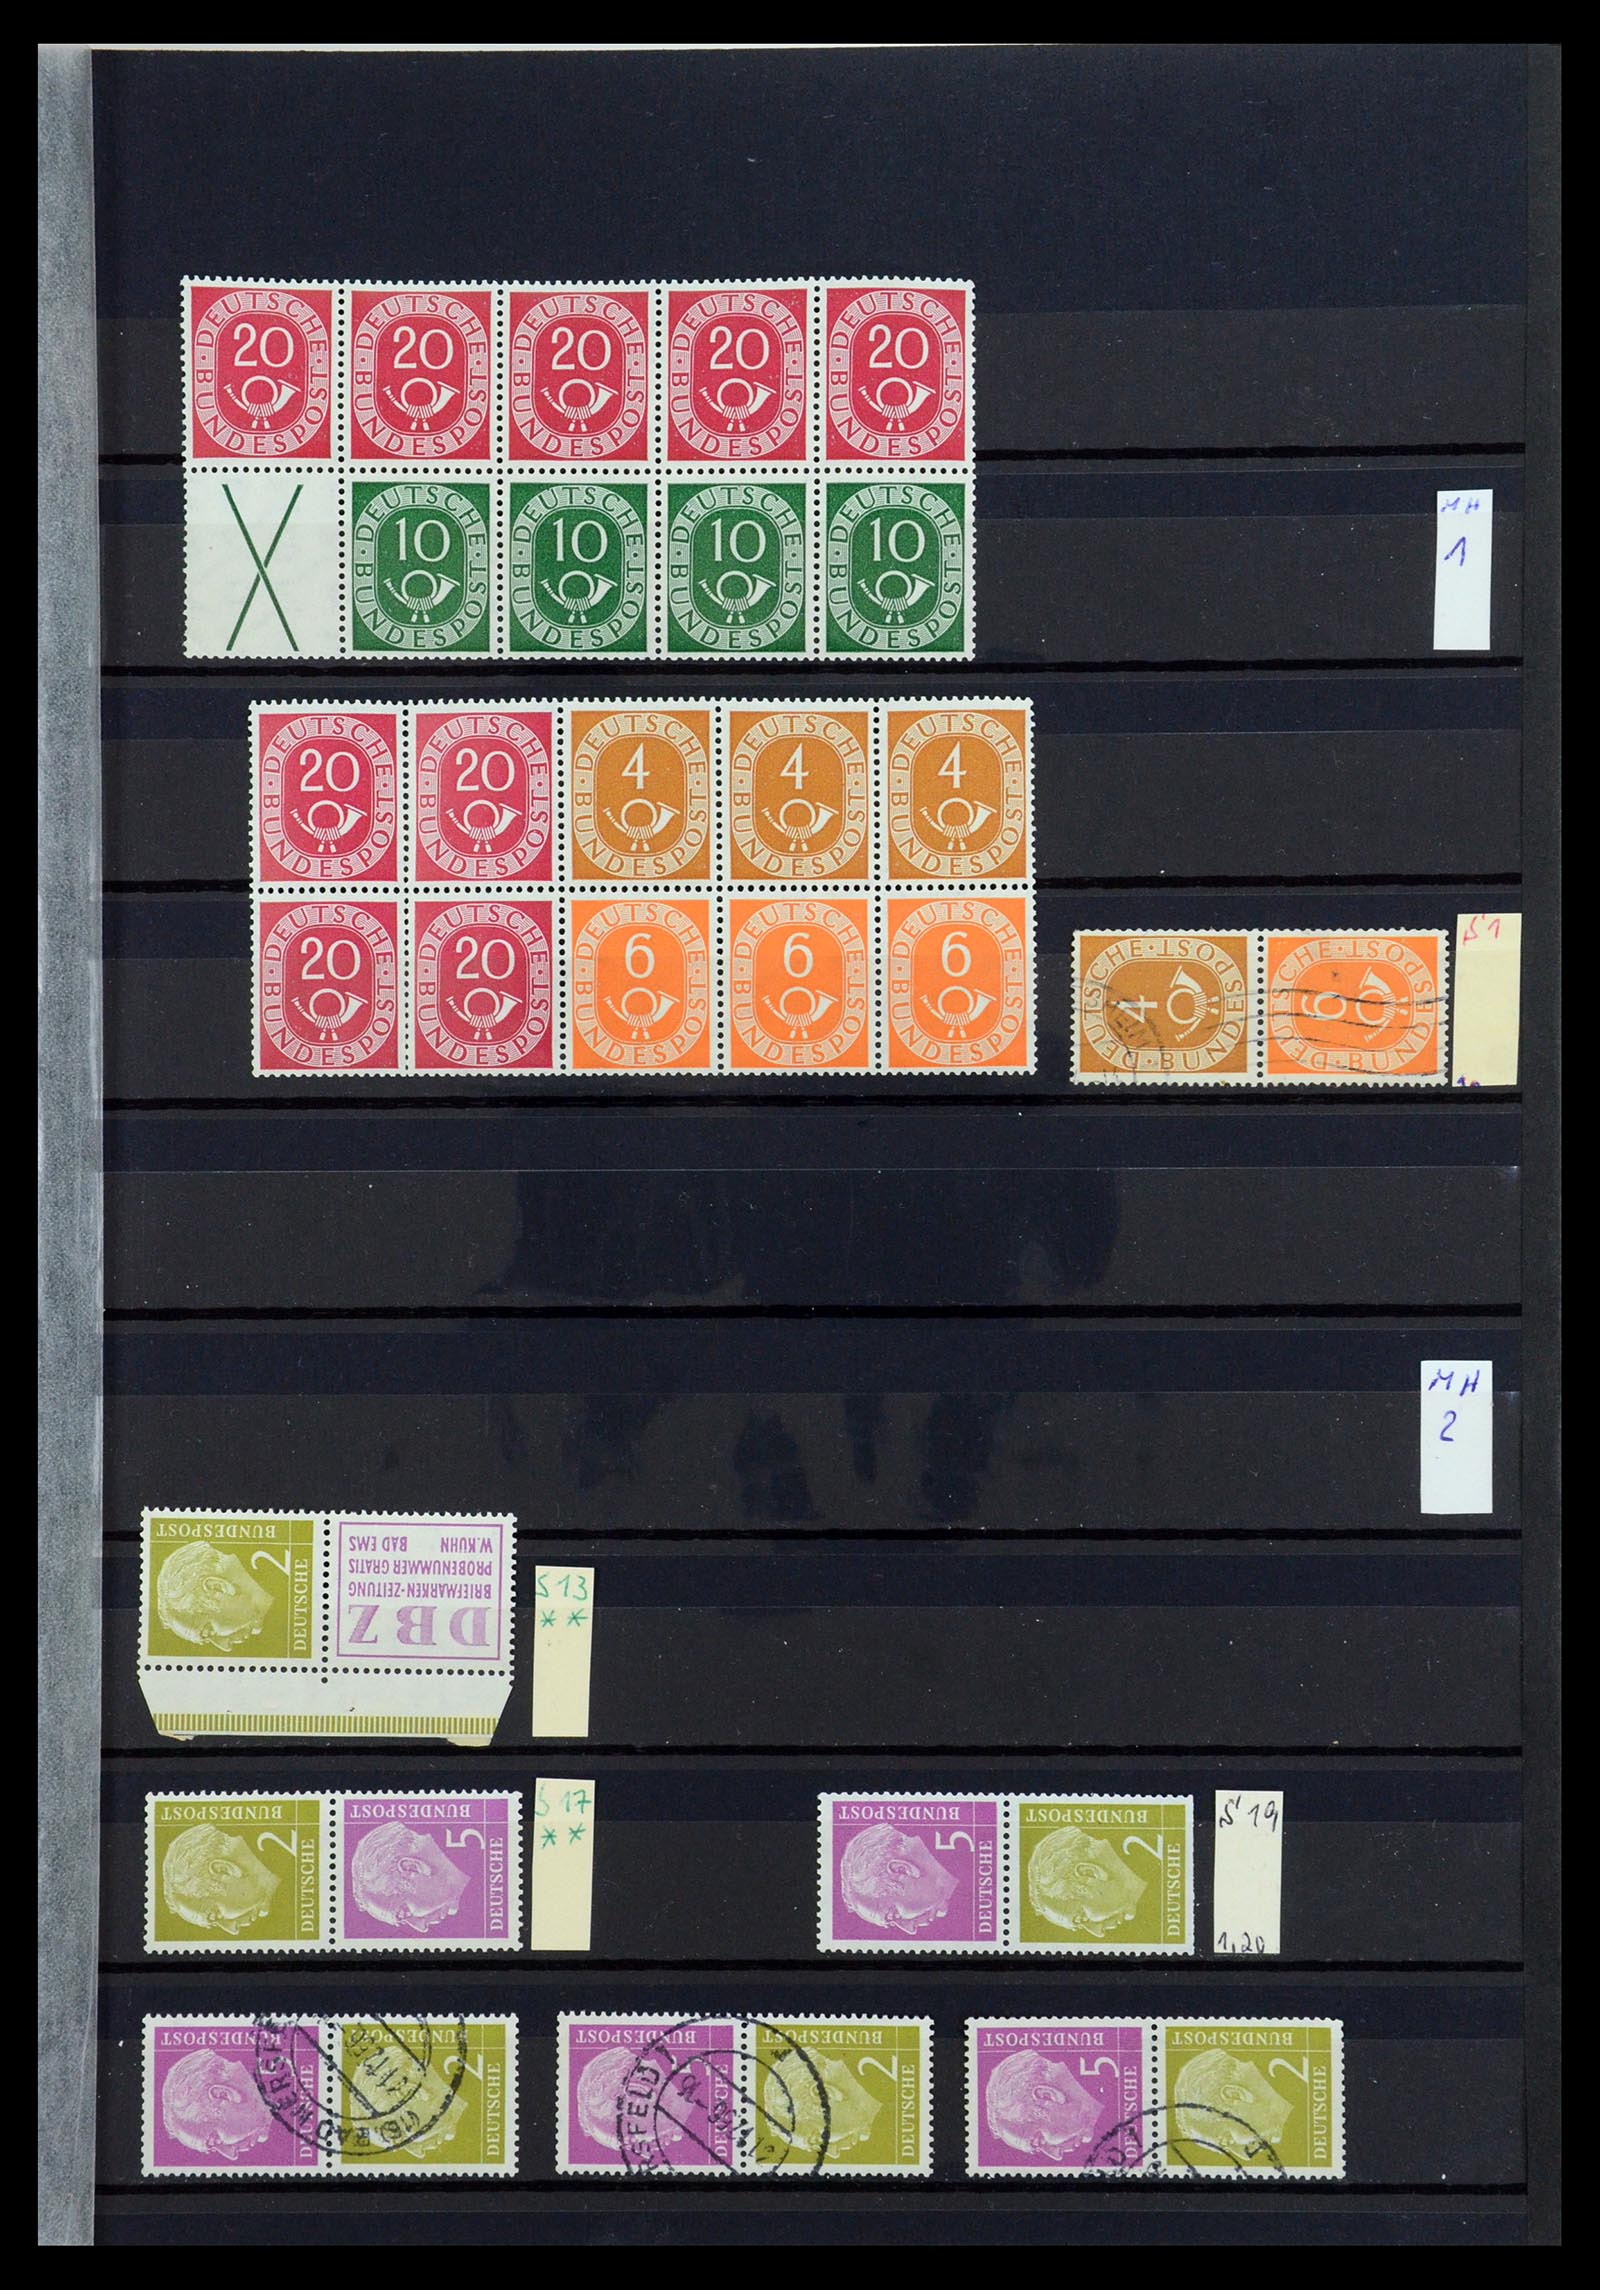 35356 001 - Stamp Collection 35356 Bundespost stamp booklets and combinations 1951-2